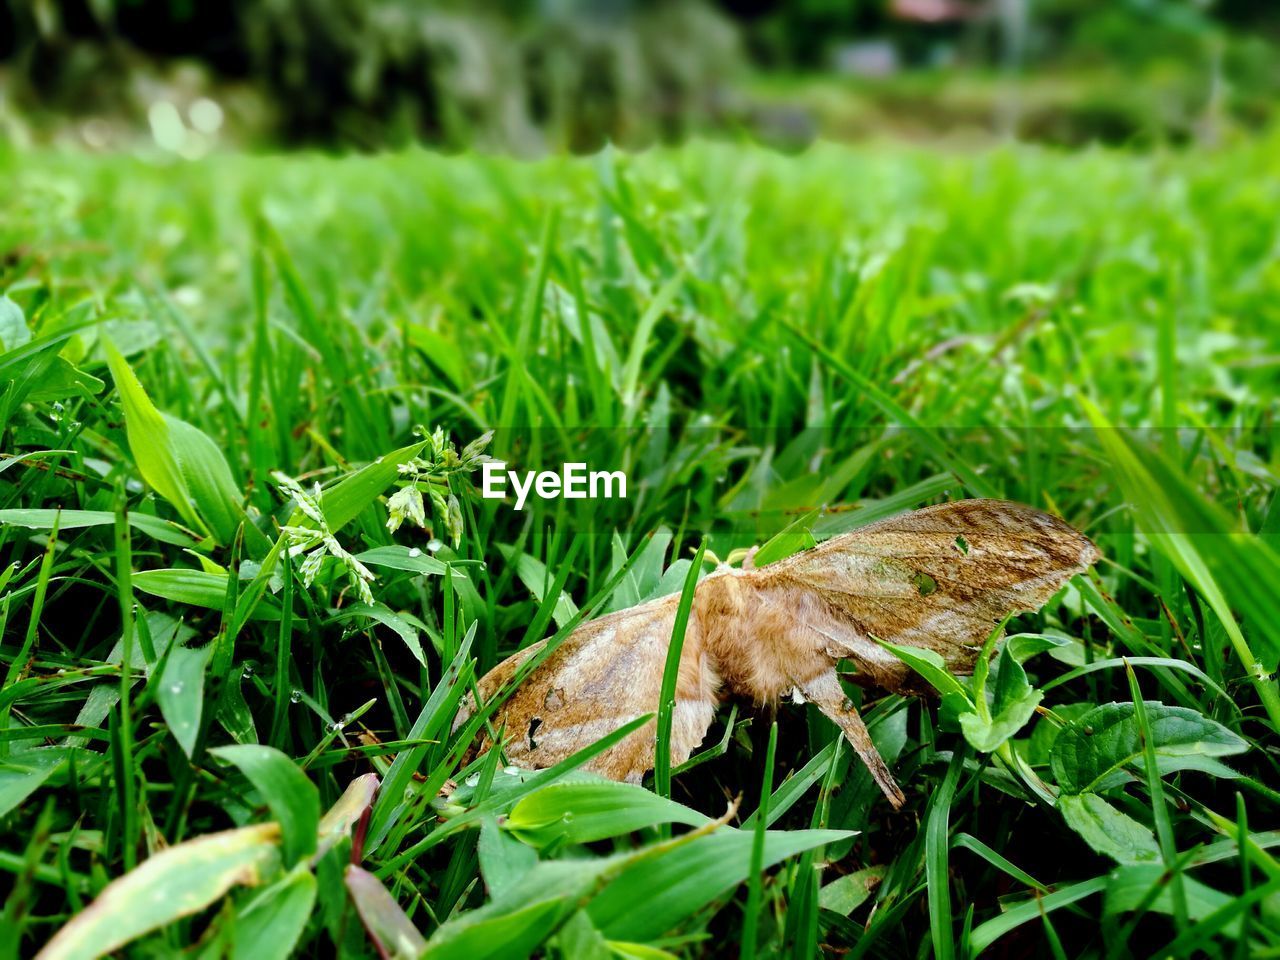 CLOSE-UP OF INSECT ON GRASS FIELD